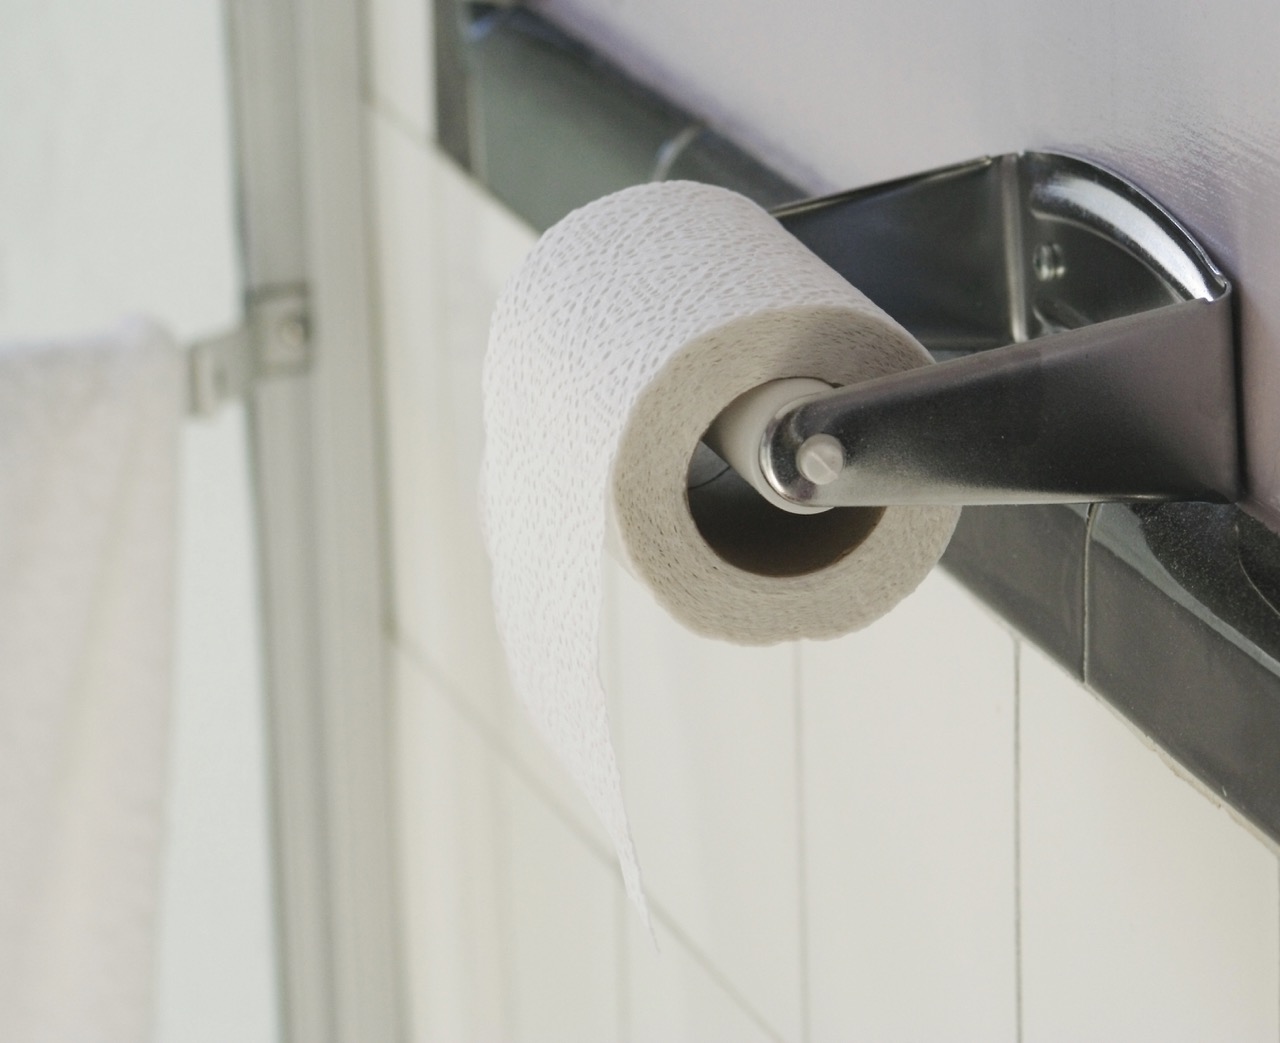 How Do You Tighten A Toilet Paper Holder